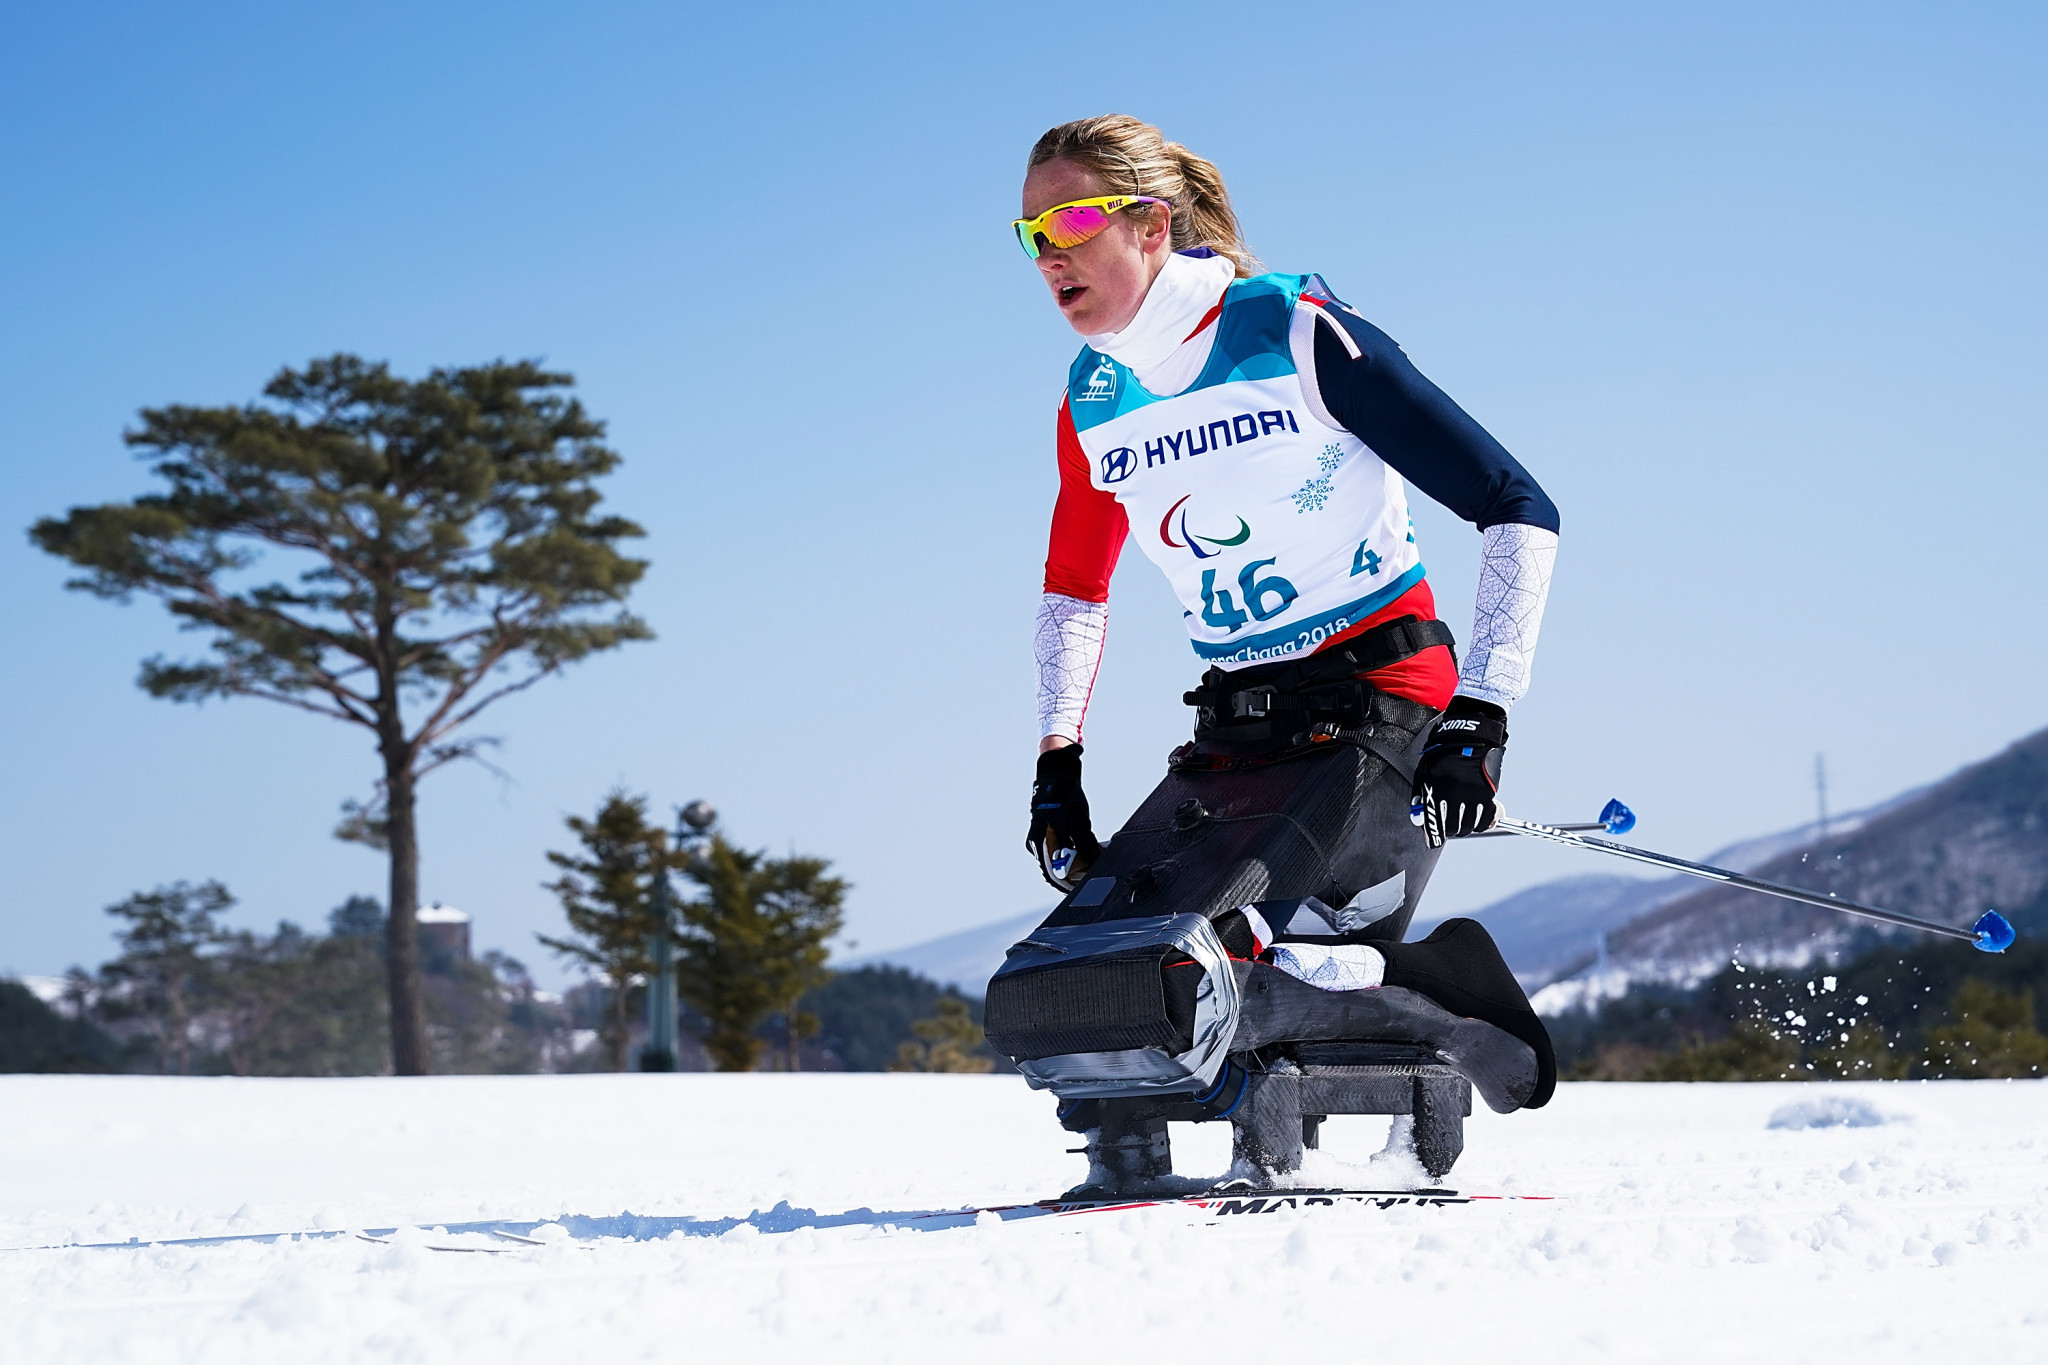 The Para Nordic Skiing season will get underway with a World Cup event in Vuokatti tomorrow, with Norway's Birgit Skarstein expected to amongst the contenders ©Getty Images